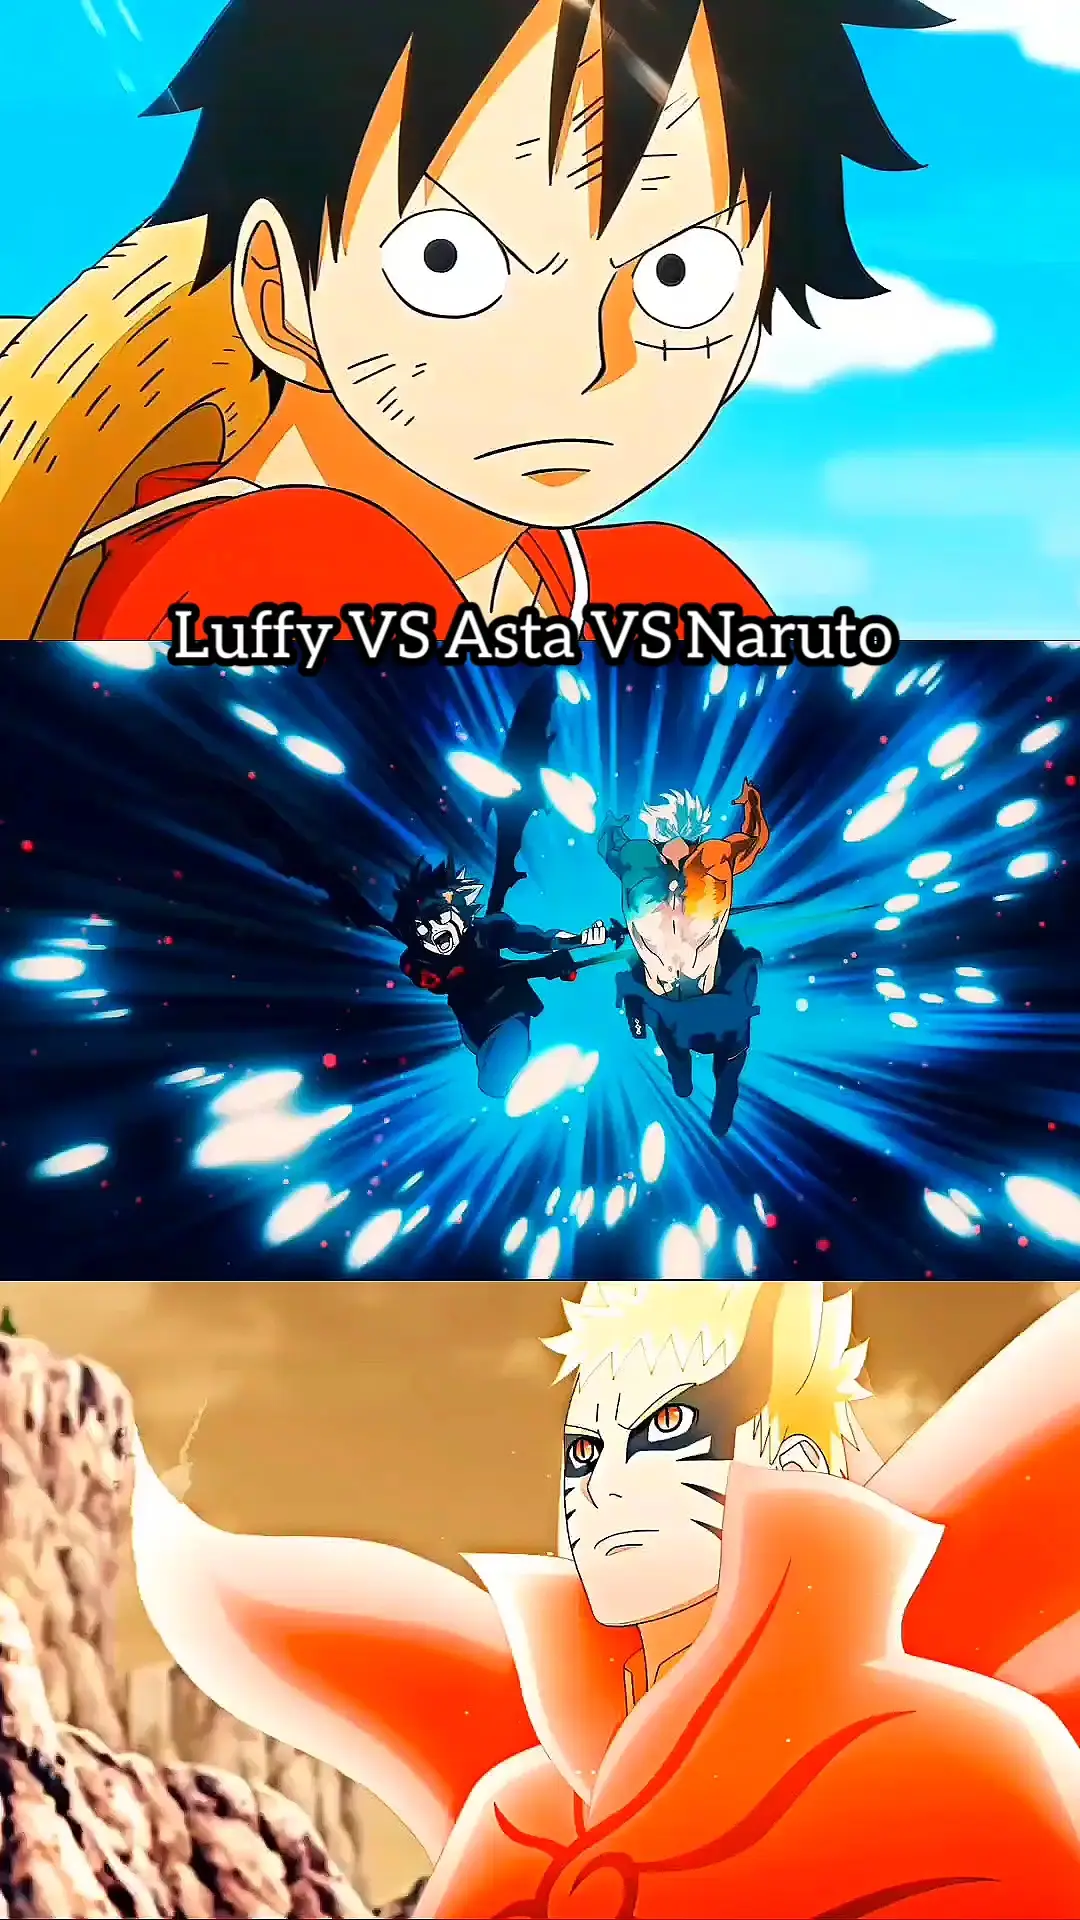 Who would win in a fight between Luffy vs Naruto?